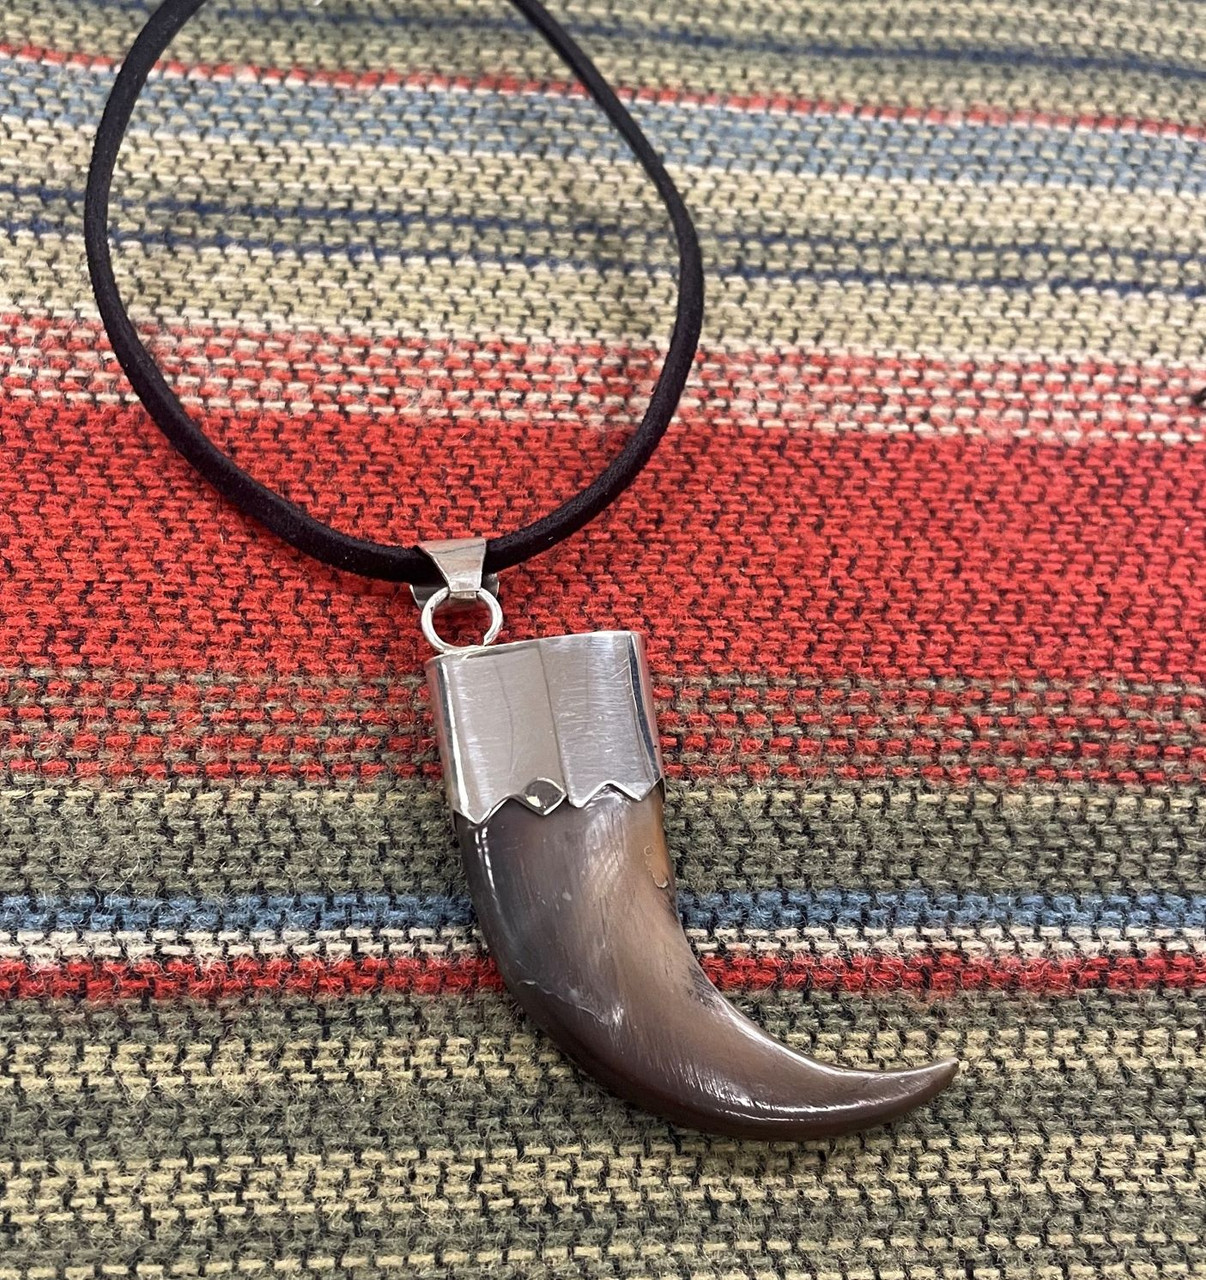 Bear claw necklace with elk ivories. Bear represented introspection, elk  was wealth and stamina. I only… | Bear claw necklace, Wolf tooth necklace,  Antler necklace